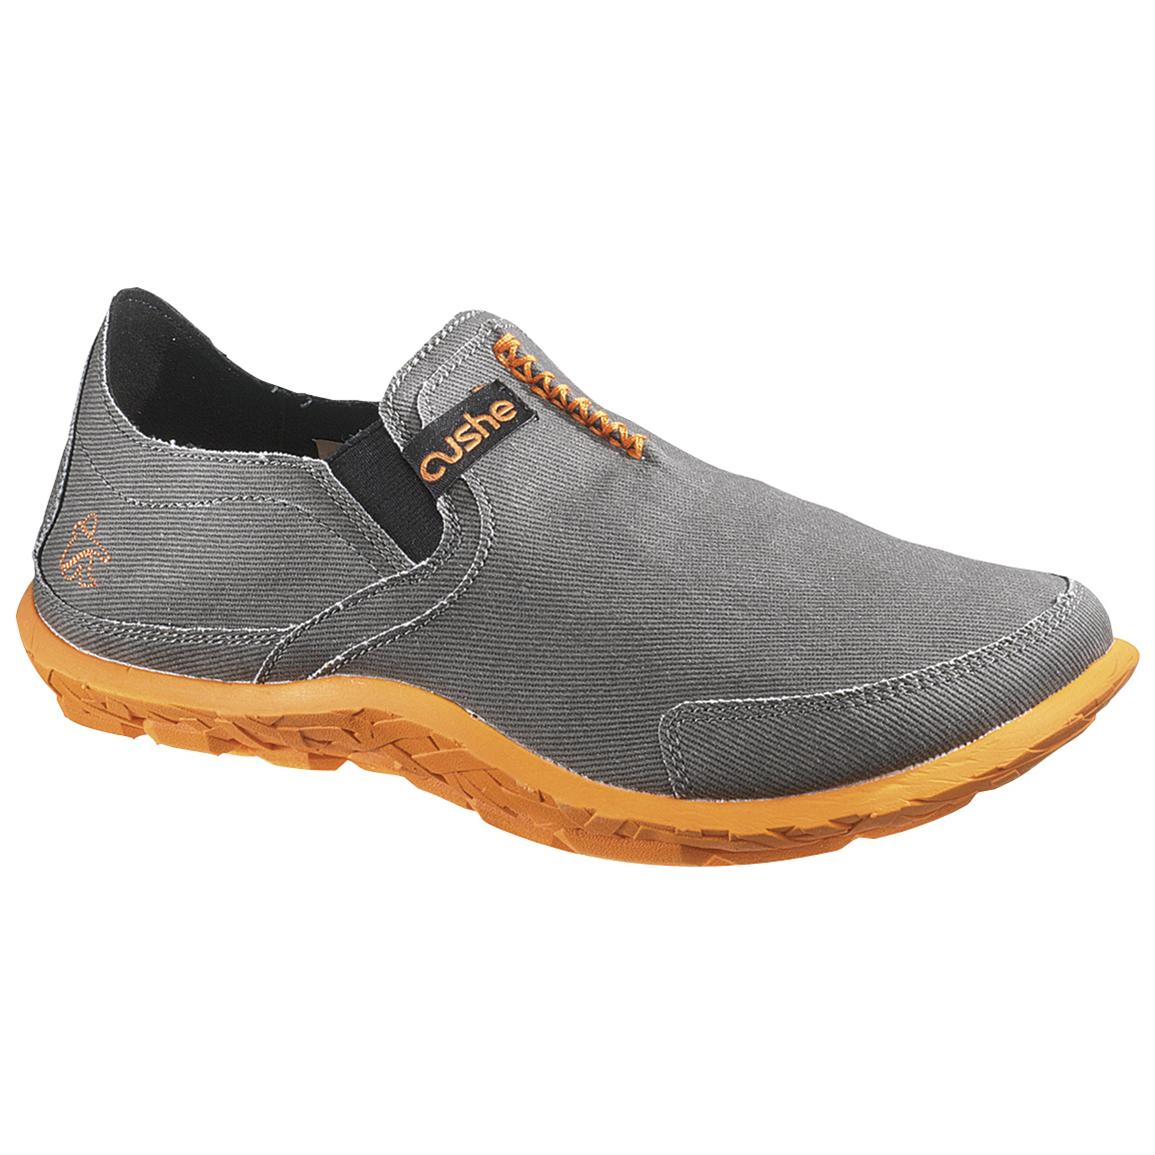 Men's Cushe M Slippers - 592852, Casual Shoes at Sportsman's Guide